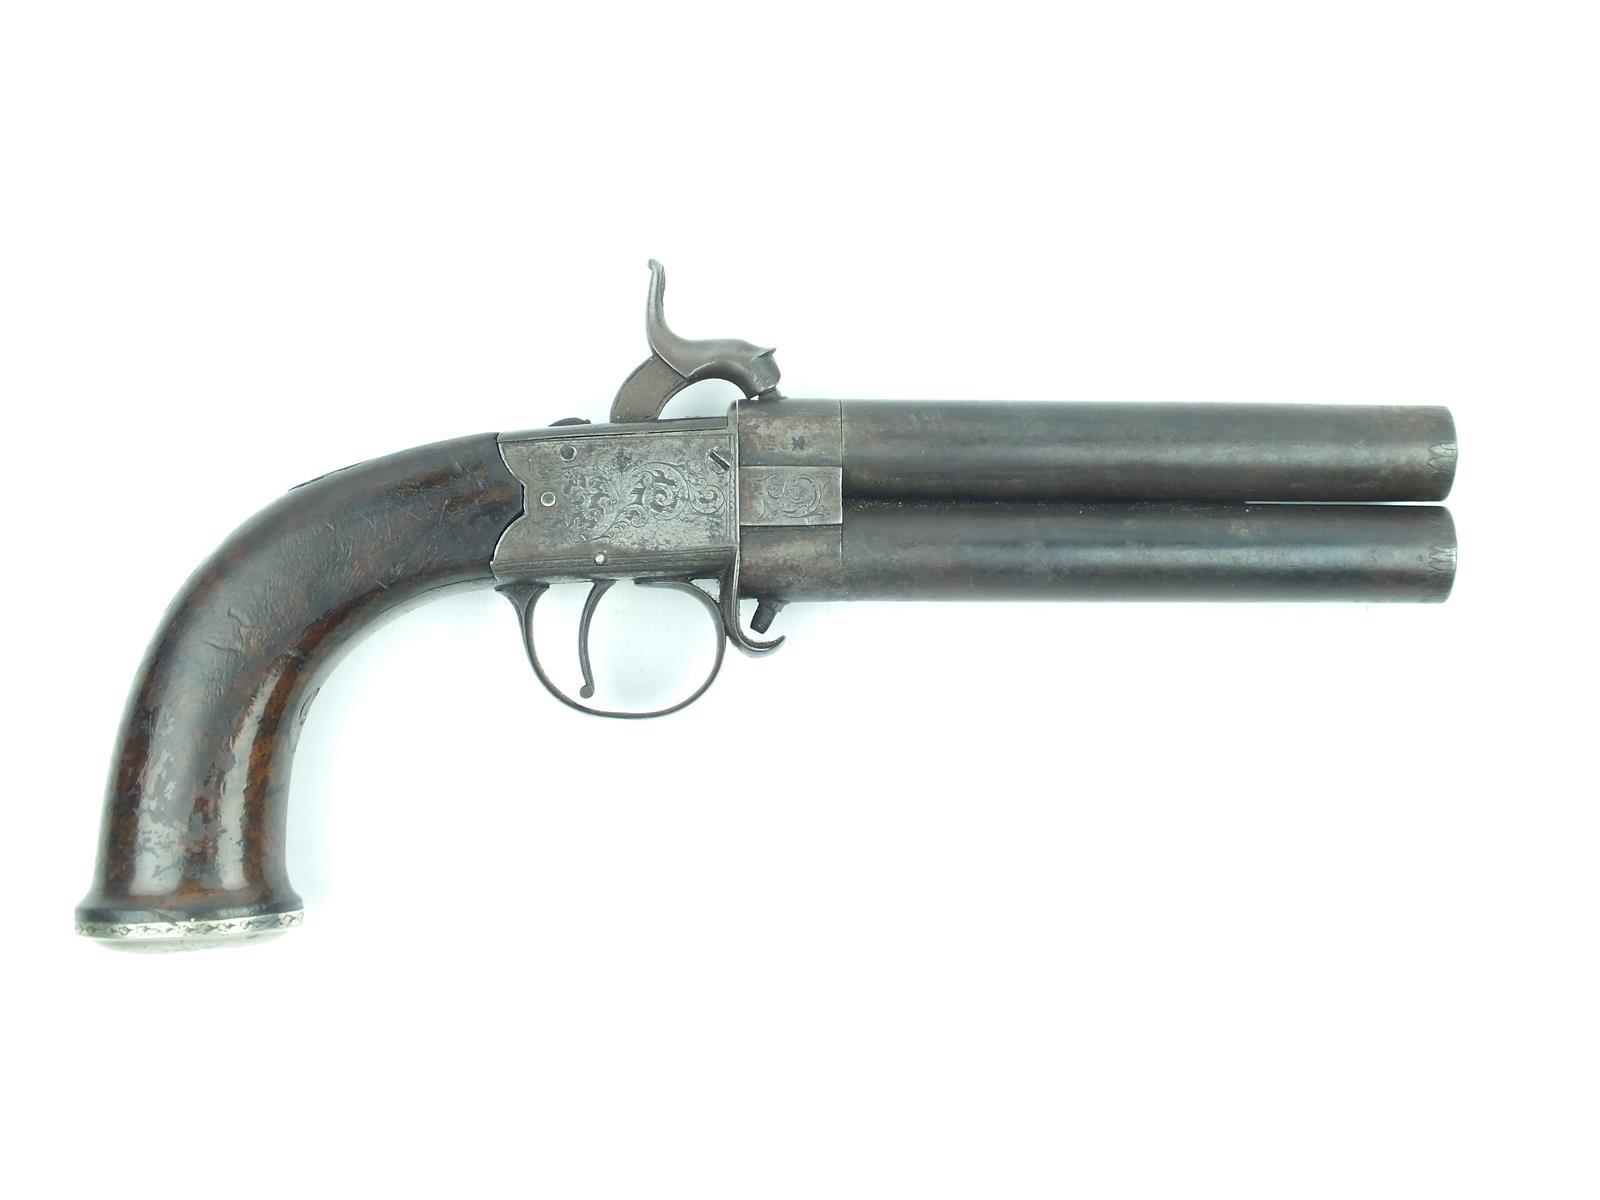 A 40-bore double barrelled percussion turnover belt pistol, 5inch barrels with scalloped engraving